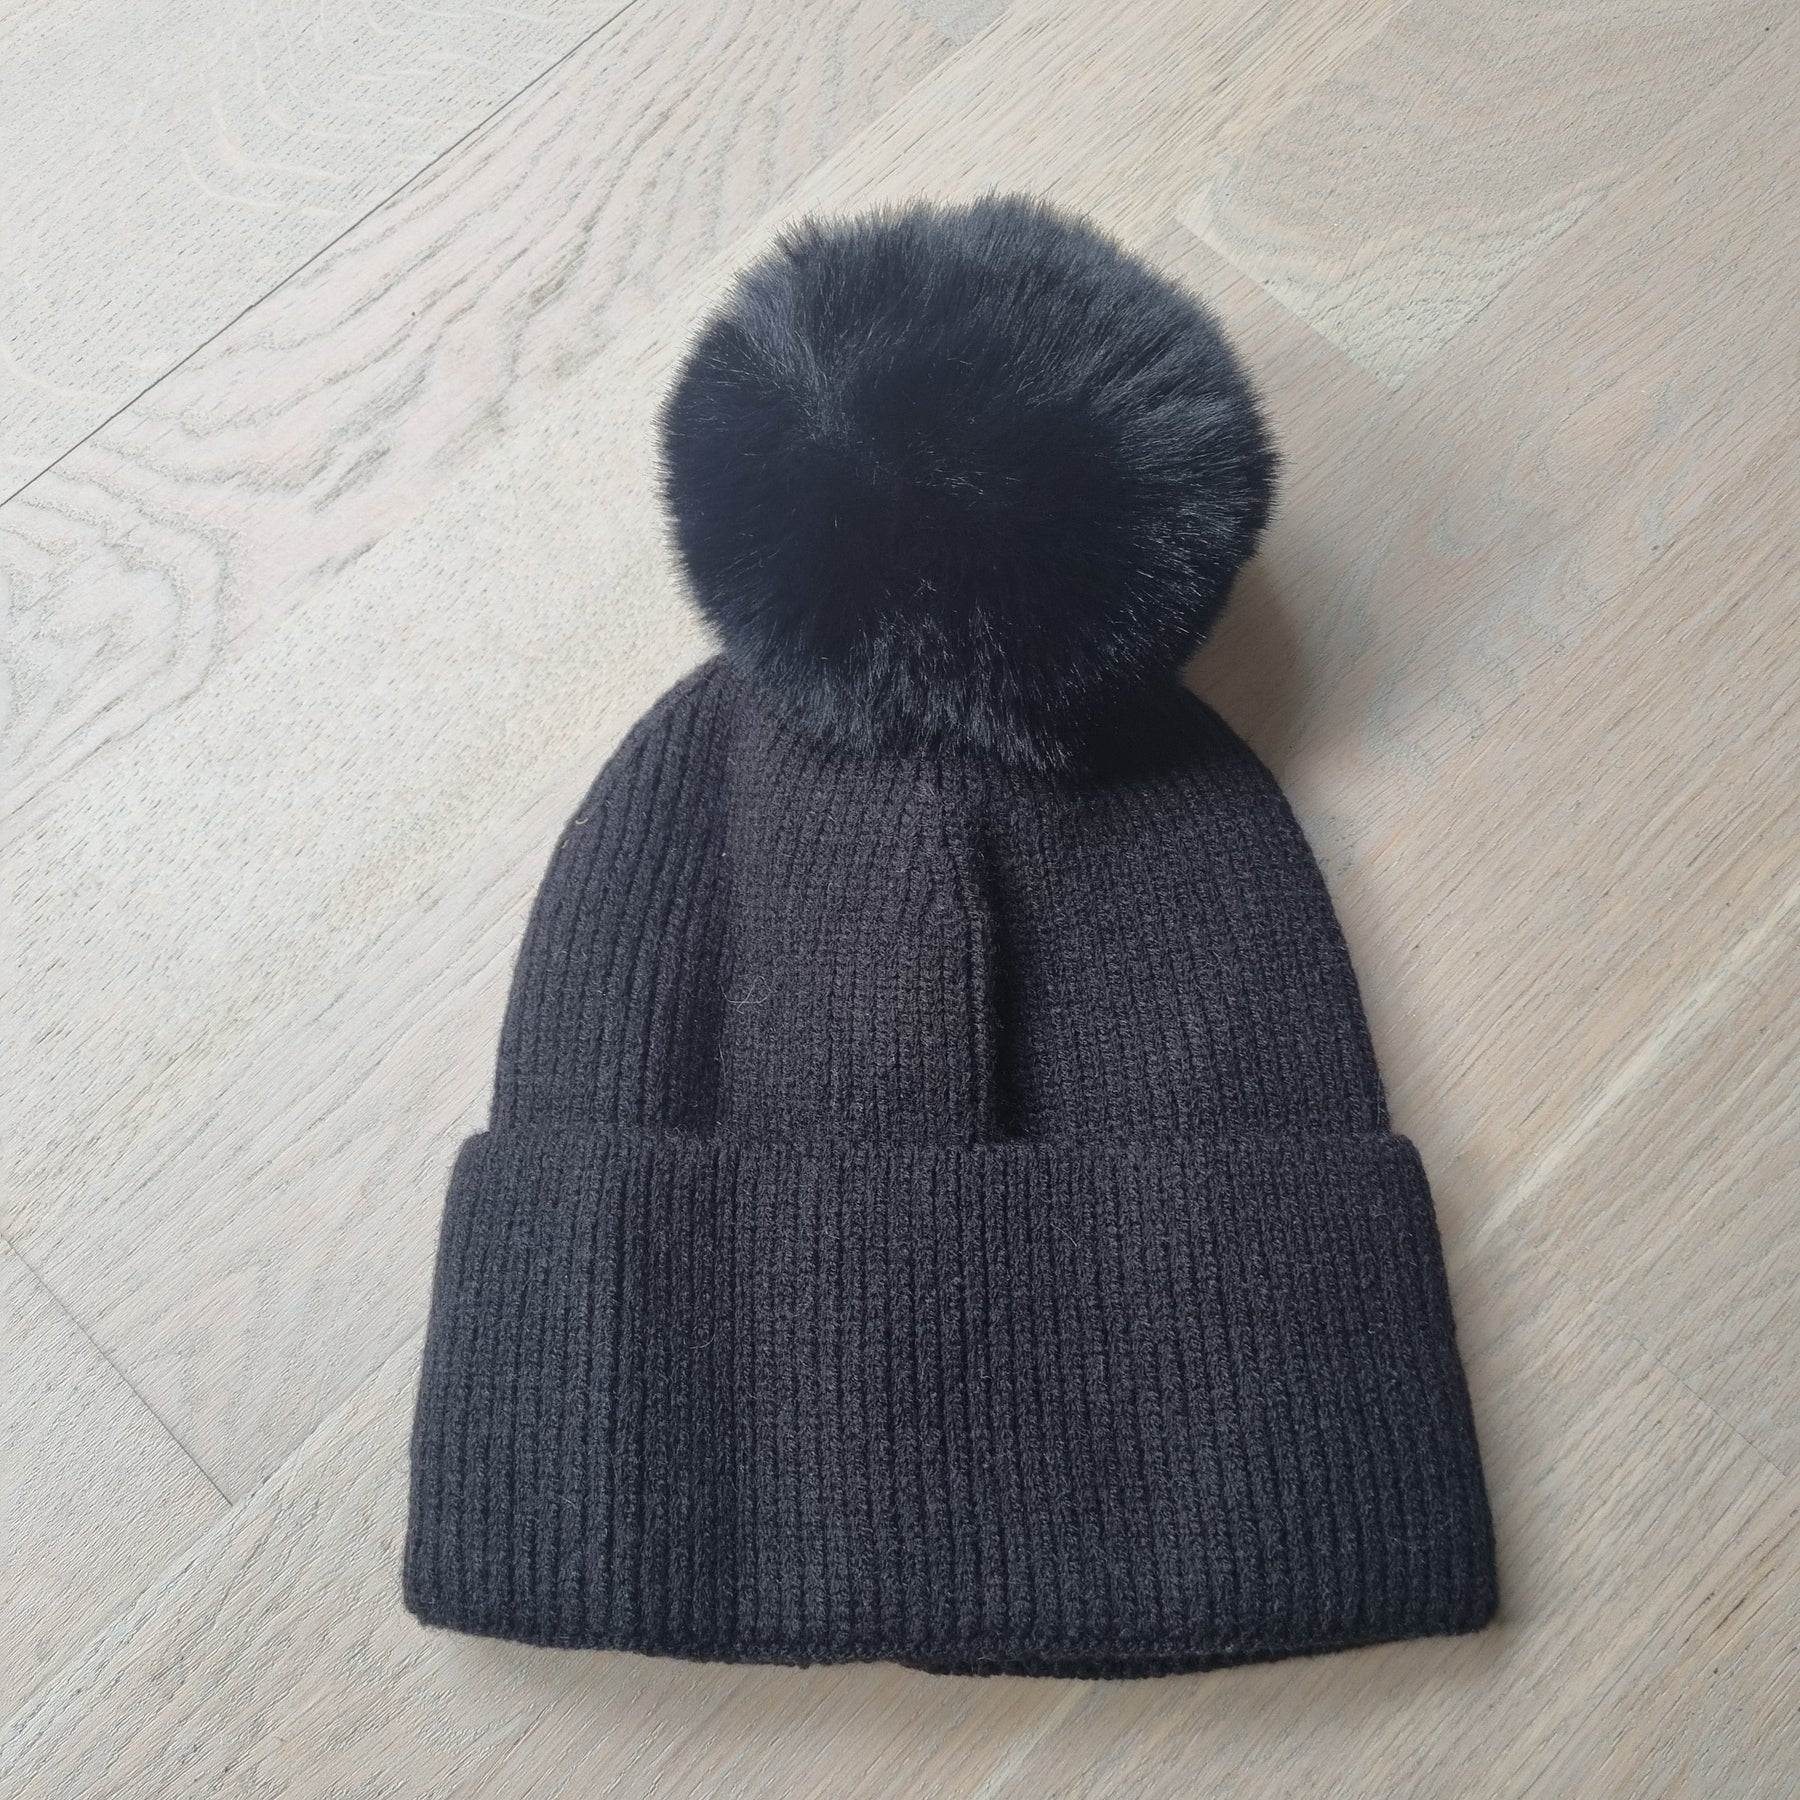 Fab Gifts | Winter Accessories Winter Beanie Pom Pom Black by Weirs of Baggot Street